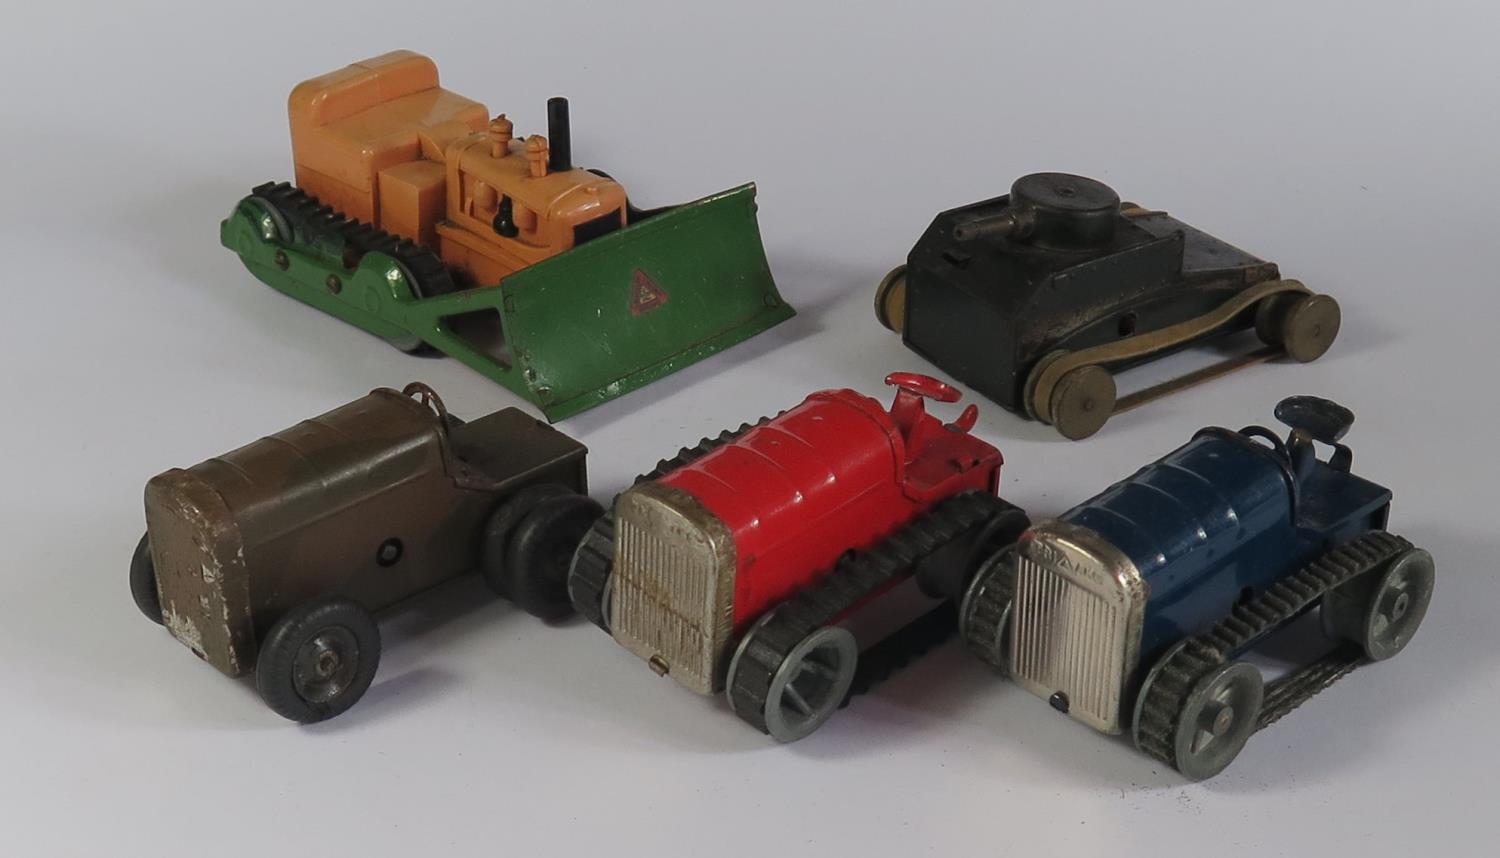 Five Triang Minic Clockwork Toys. Three 11M Tractor Variations, an Allis Chalmers Bulldozer and a